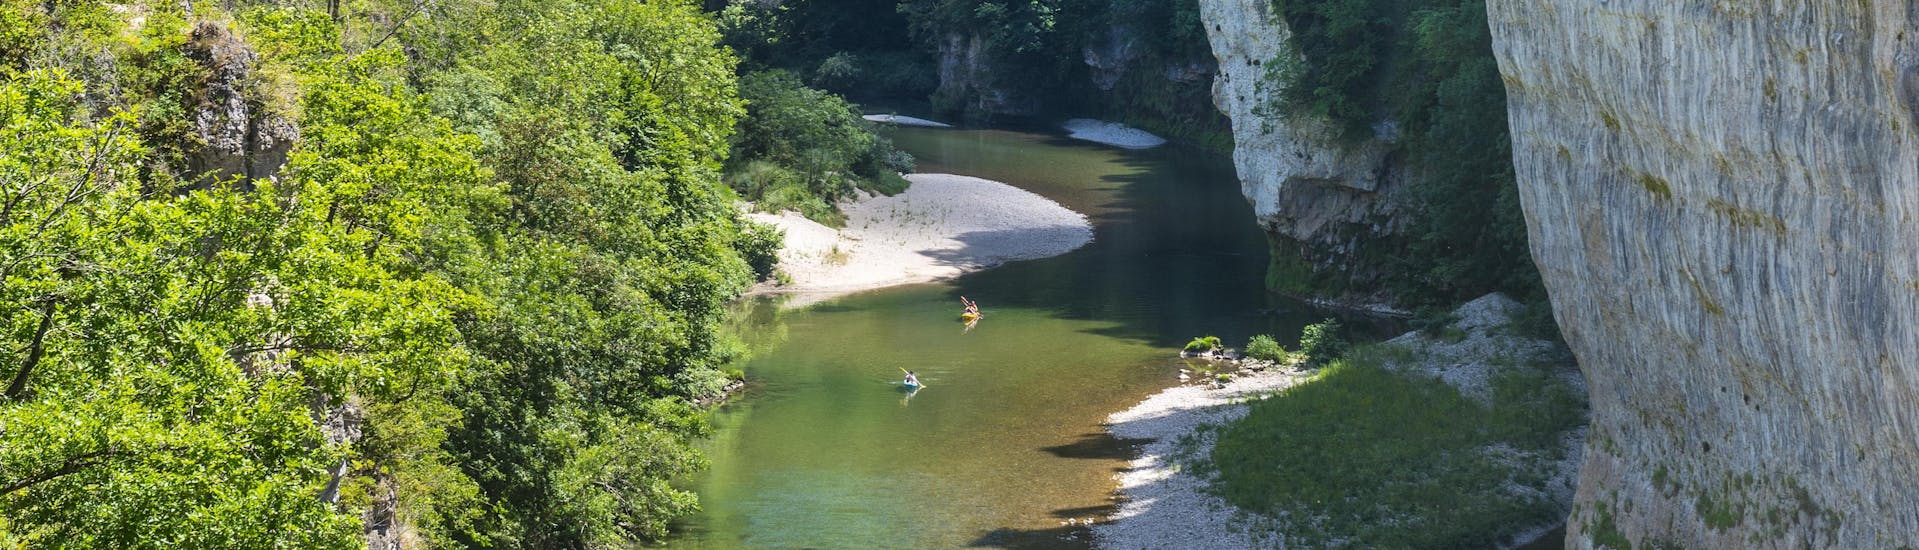 Holidaymakers are canoeing in the middle of the impressive gorges of the Tarn in France, starting from La Malène.